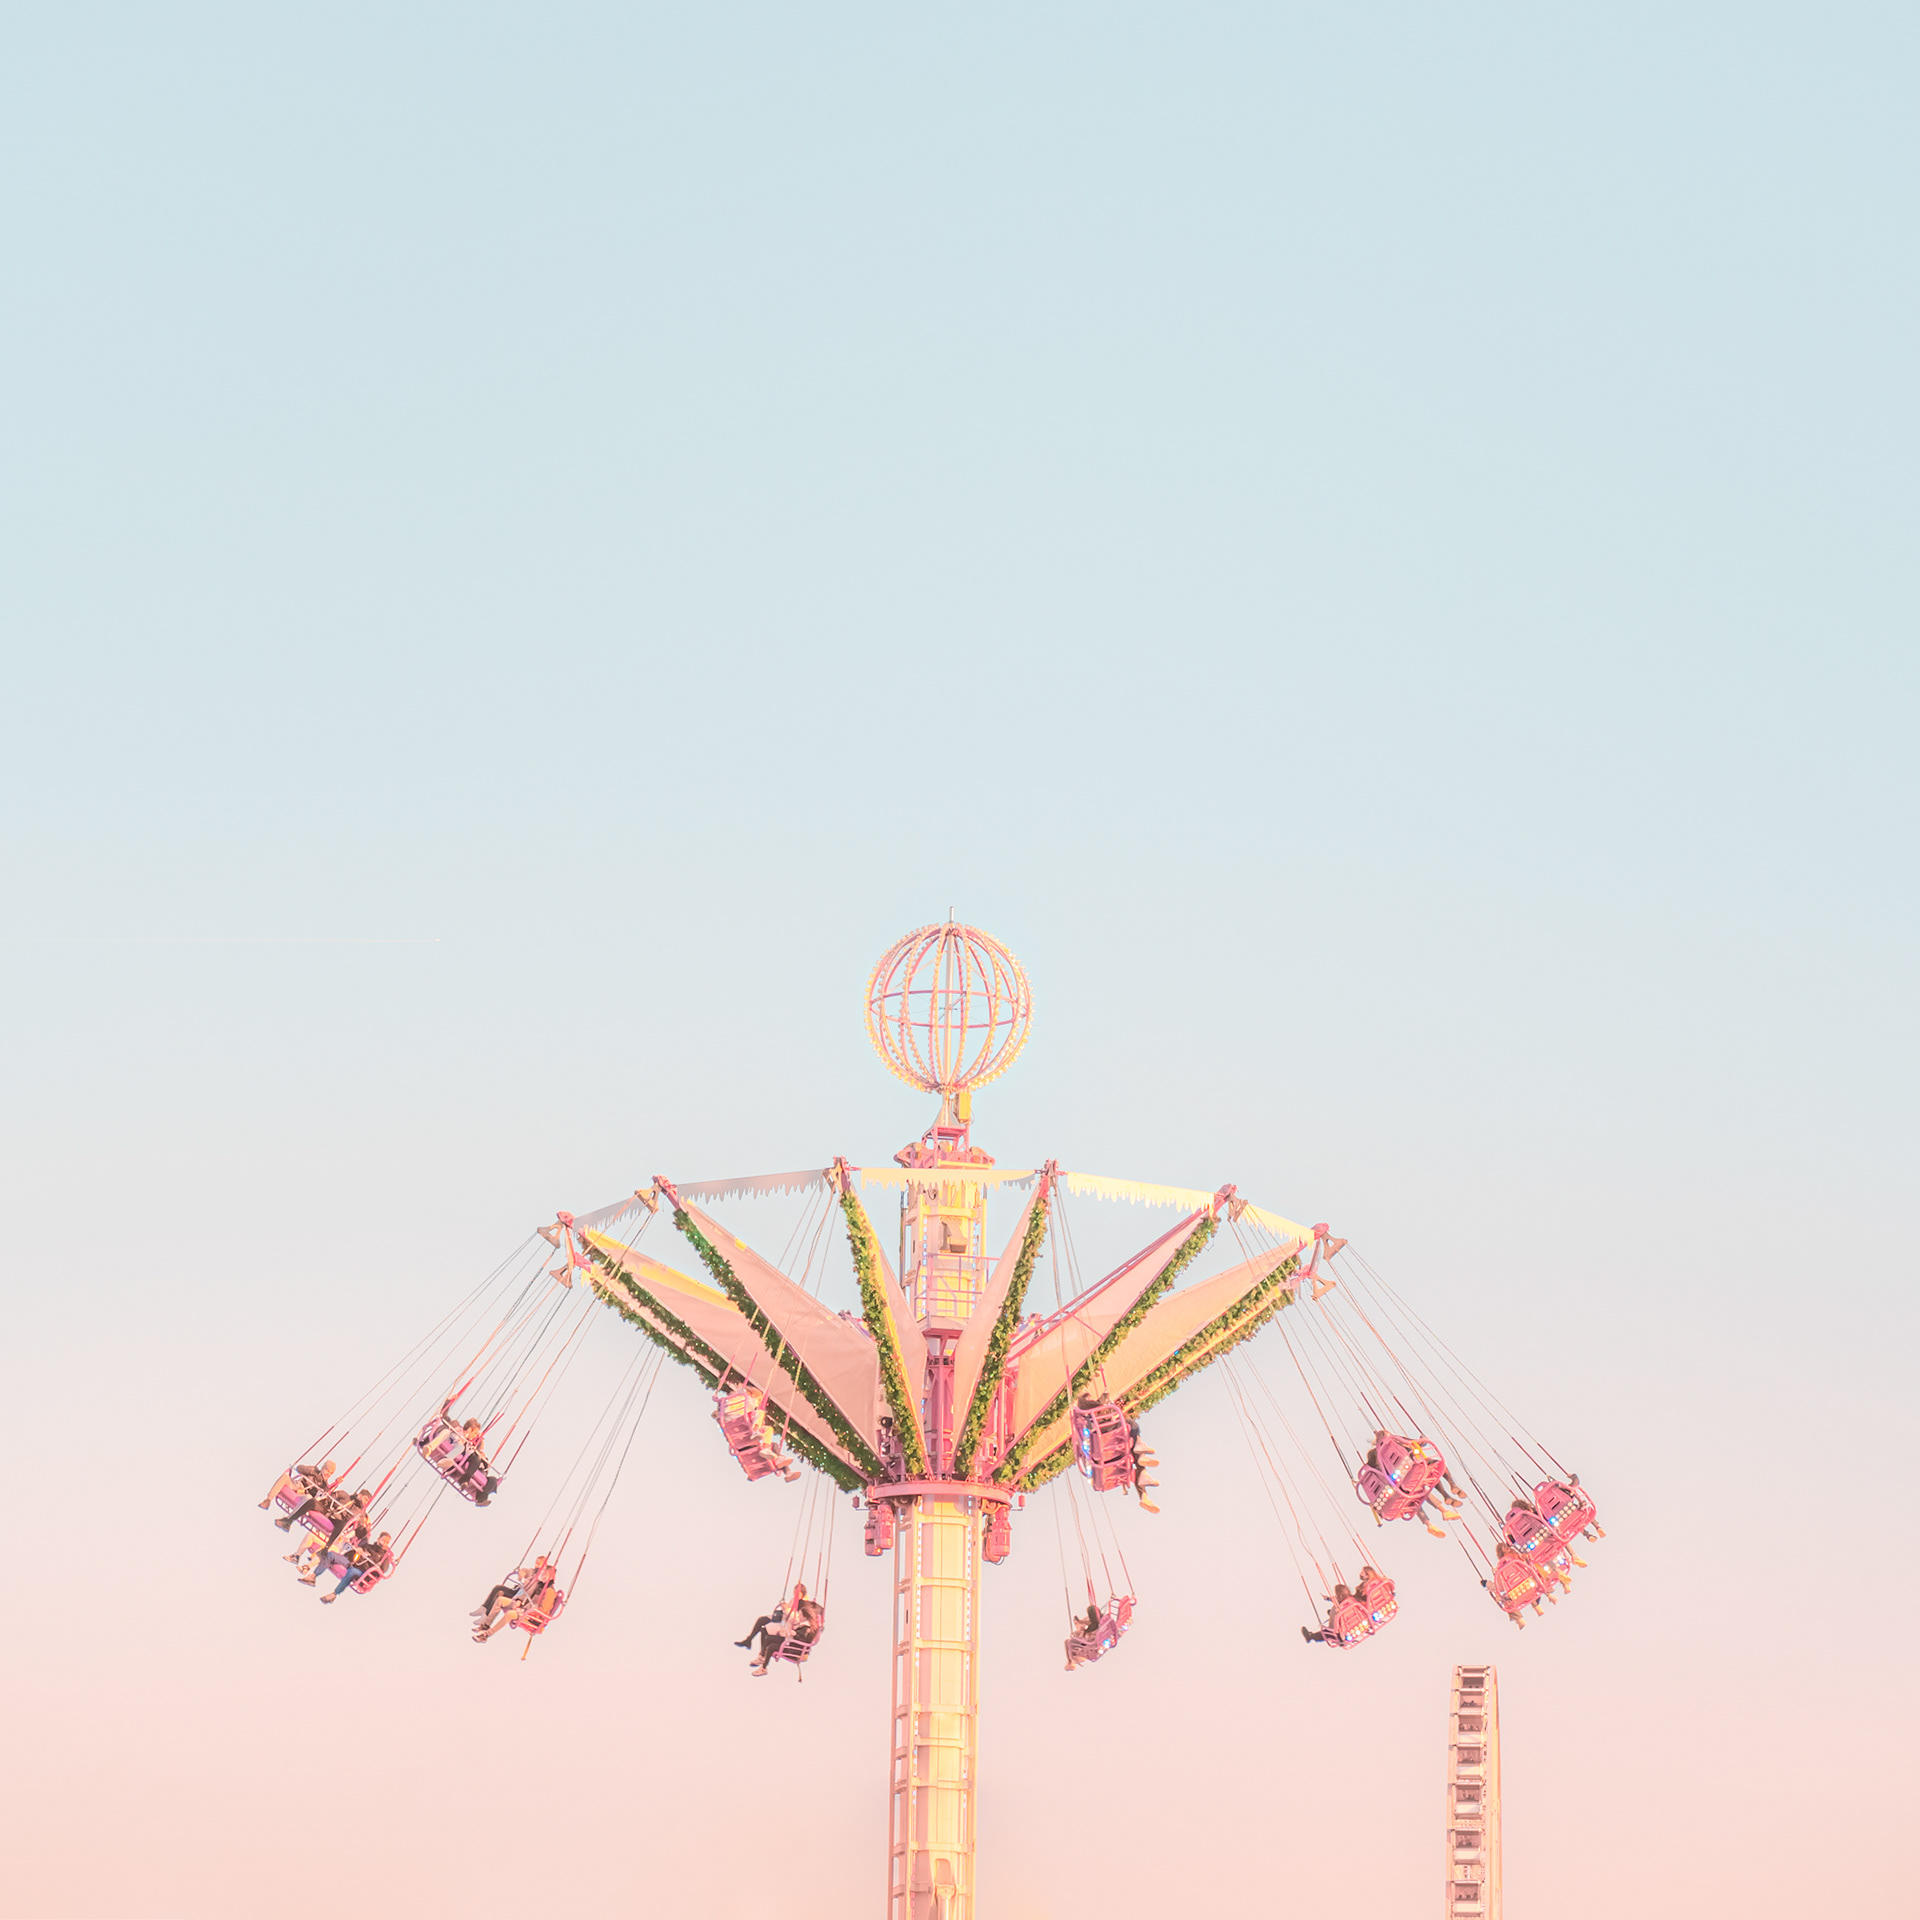 The carousel of the fun fair of Paris, in the Tuileries Gardens, on a blurred pastel sky at sunset. Pink to blue gradient of colors. Paris